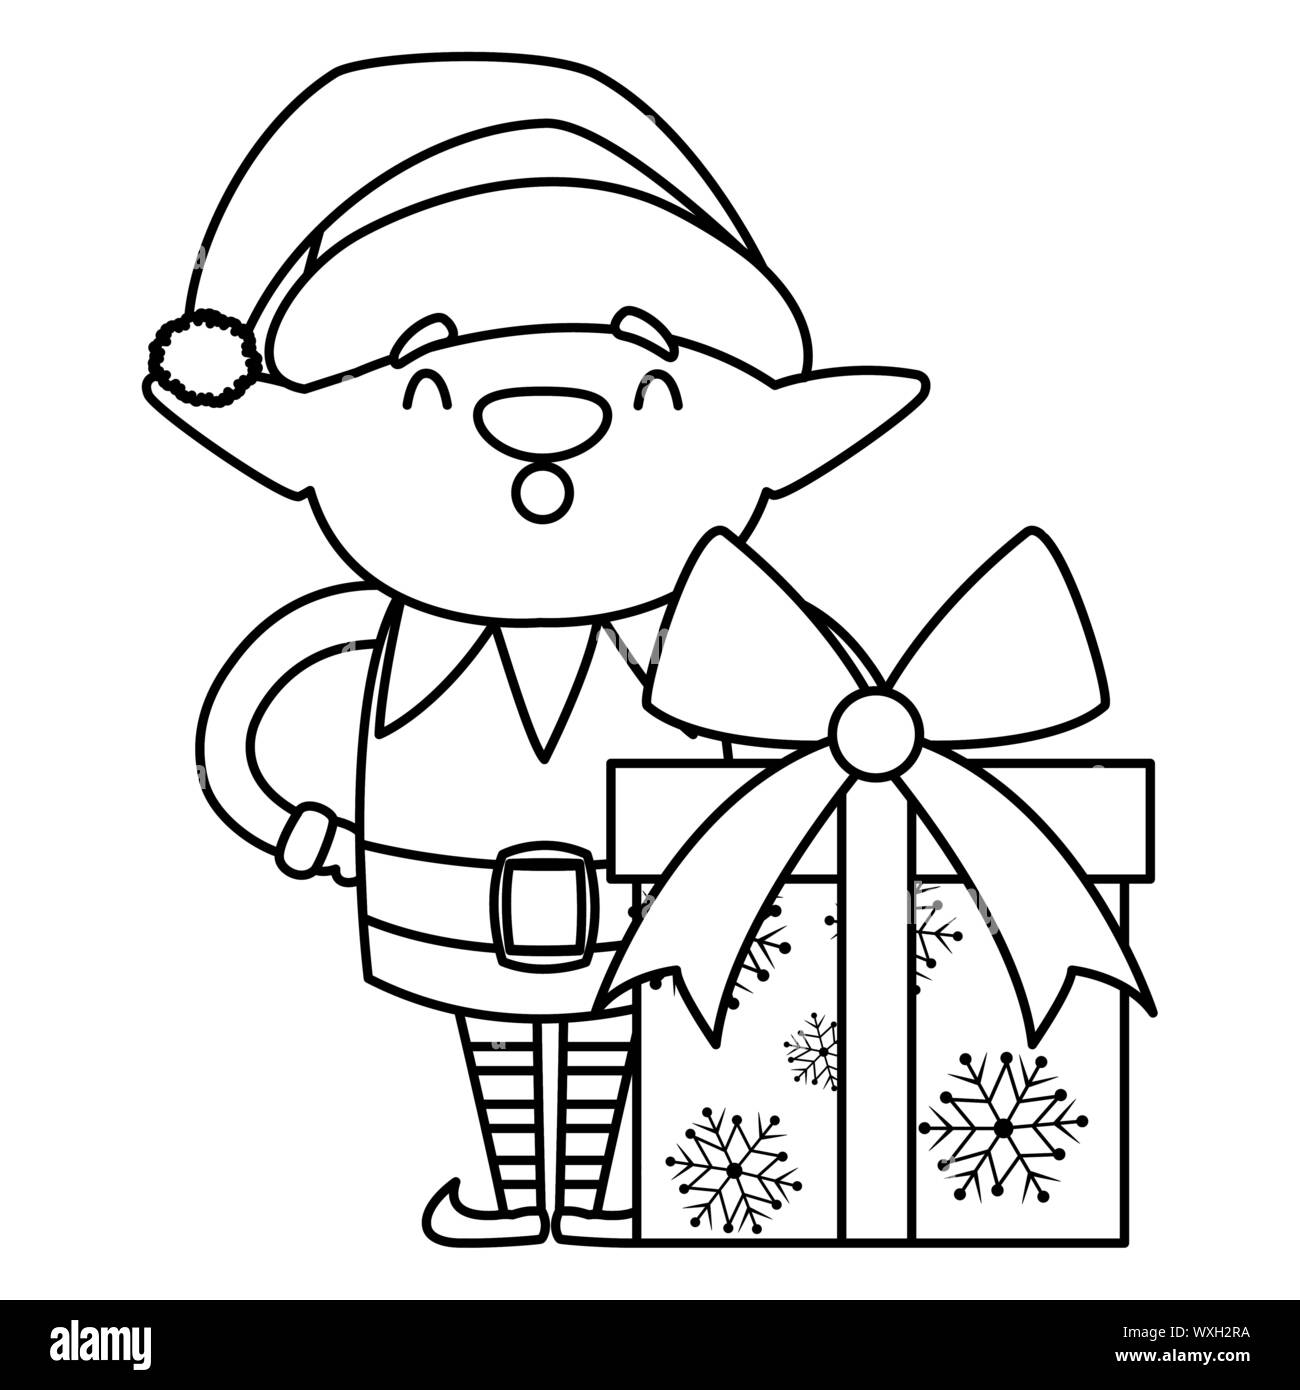 Christmas elf and gift box over white background, vector illustration ...